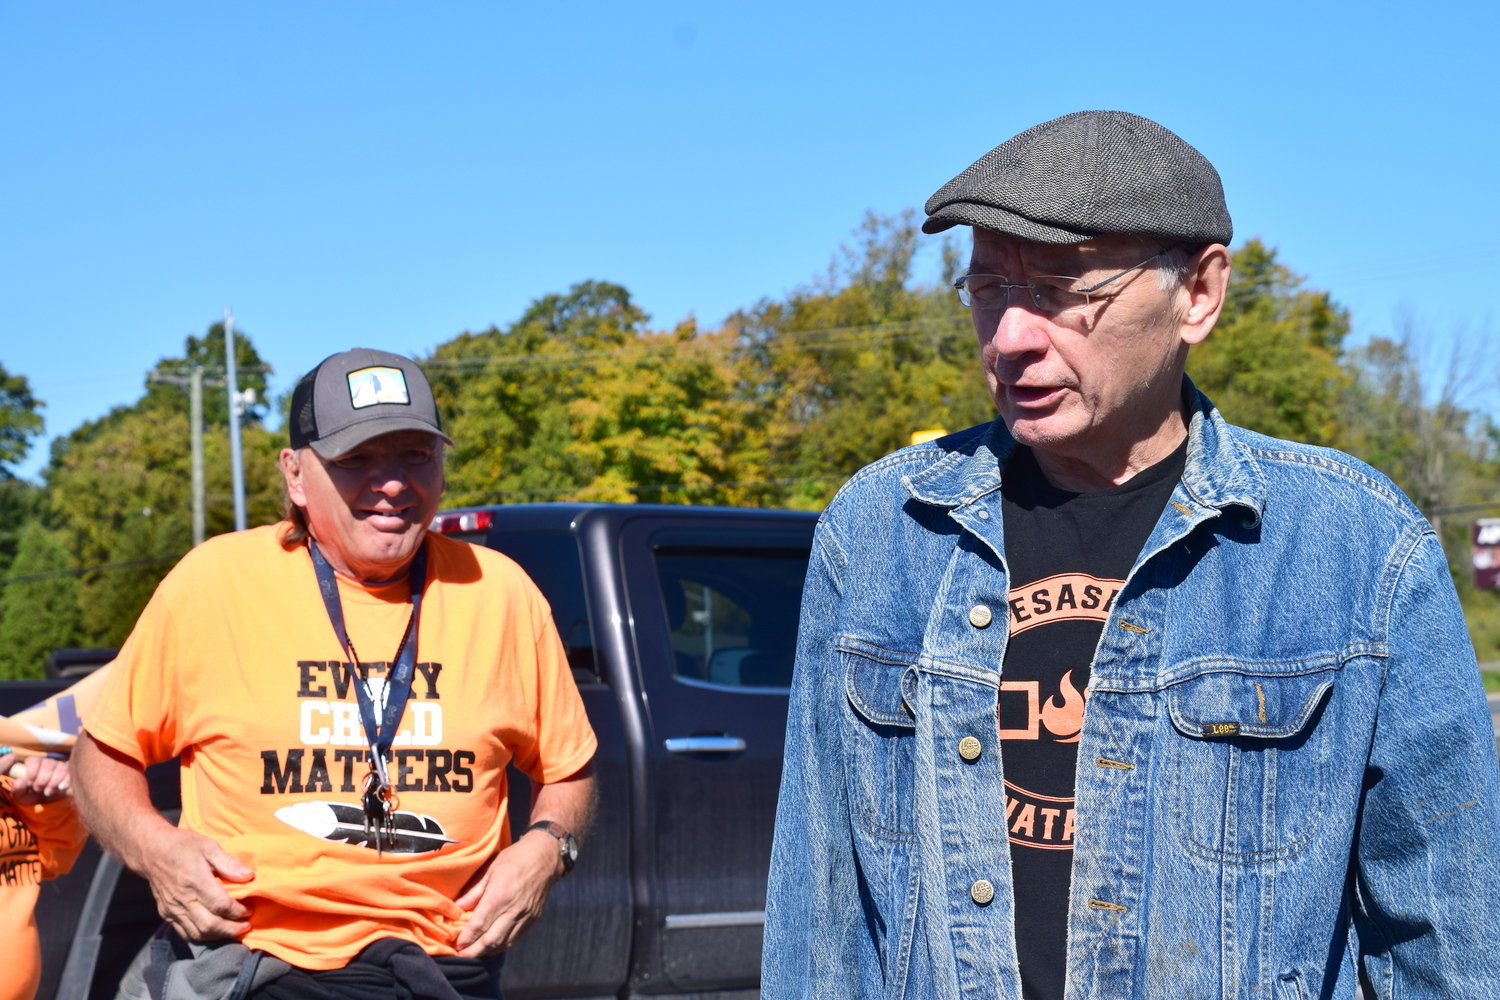 Residential school survivor Doug Kanentiio George, right, helped organize last Saturday’s march from Akwesasne to Trinity Anglican Church in Ontario to call for access to all records related to the Mohawk Institute.